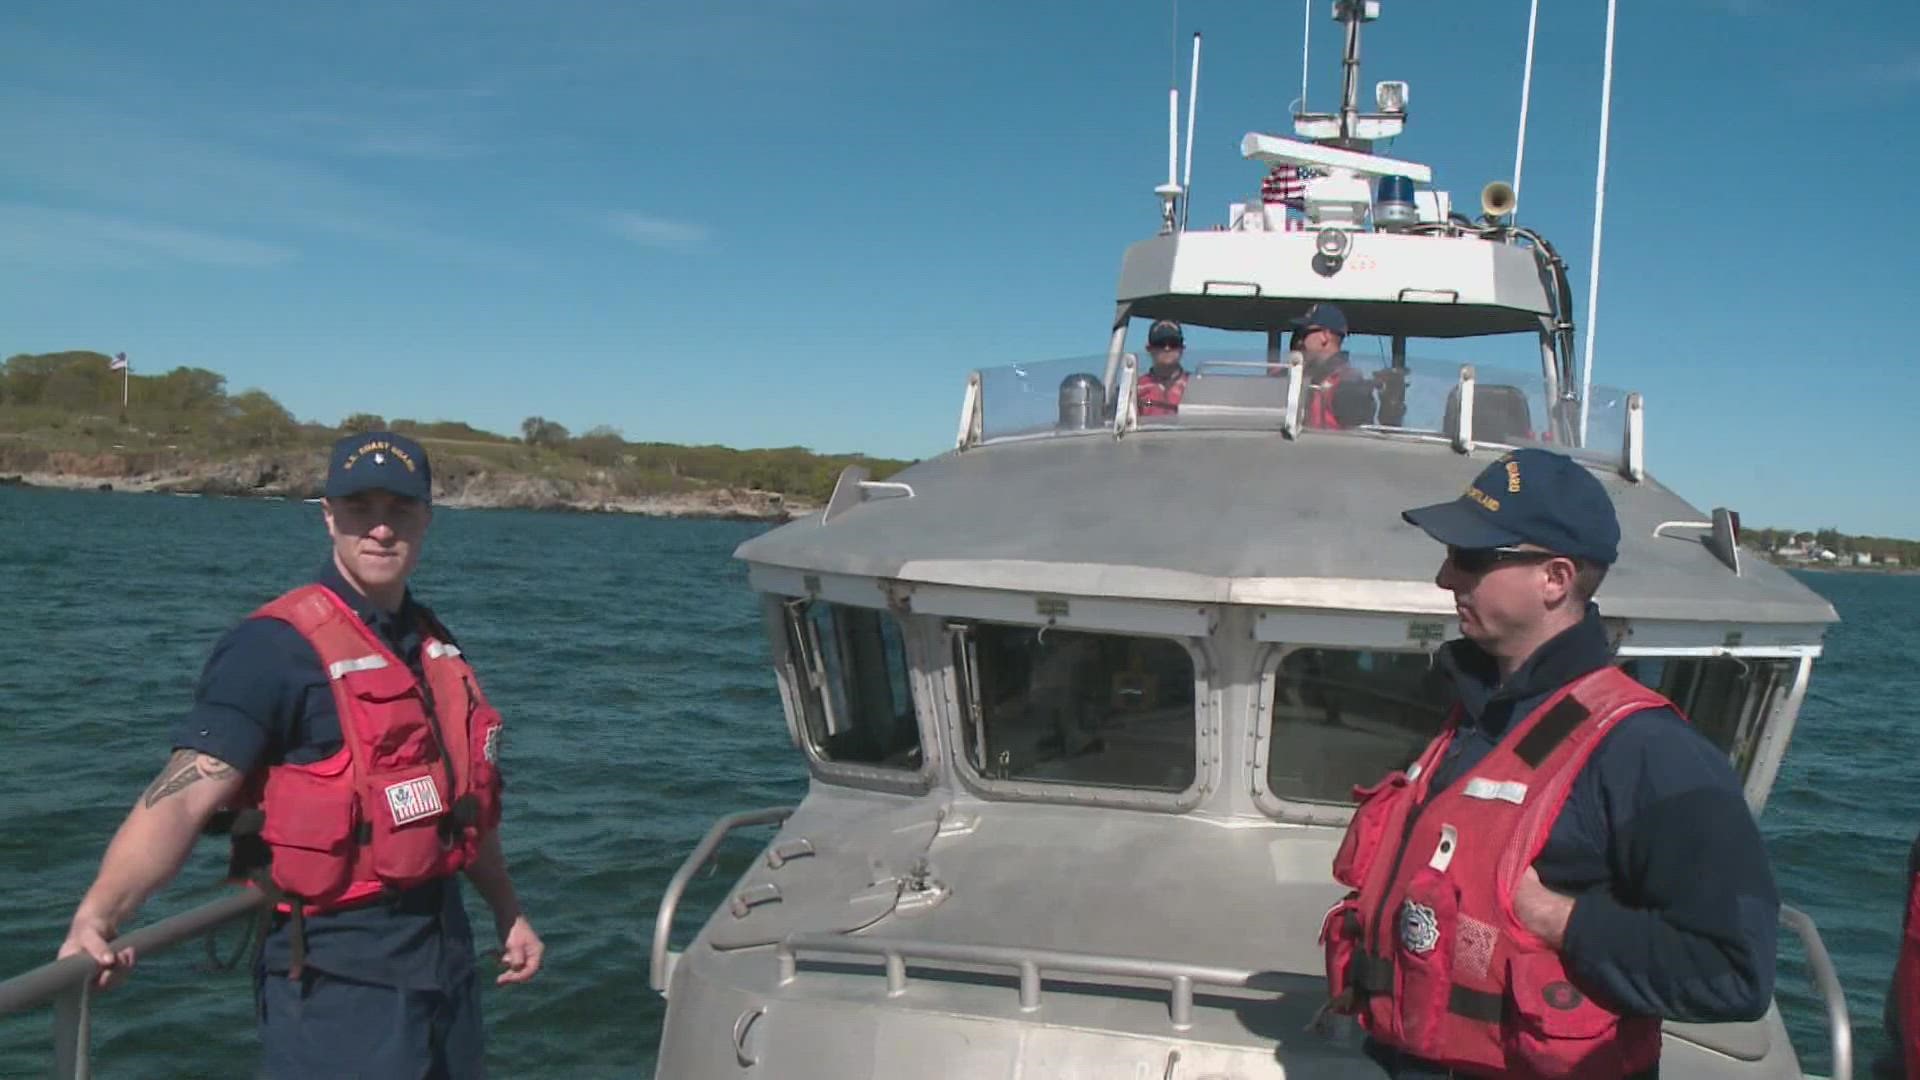 The USCG says it's important to make a float plan so that someone on land knows where you'll be in case an incident does arise, and crews can reach you more quickly.